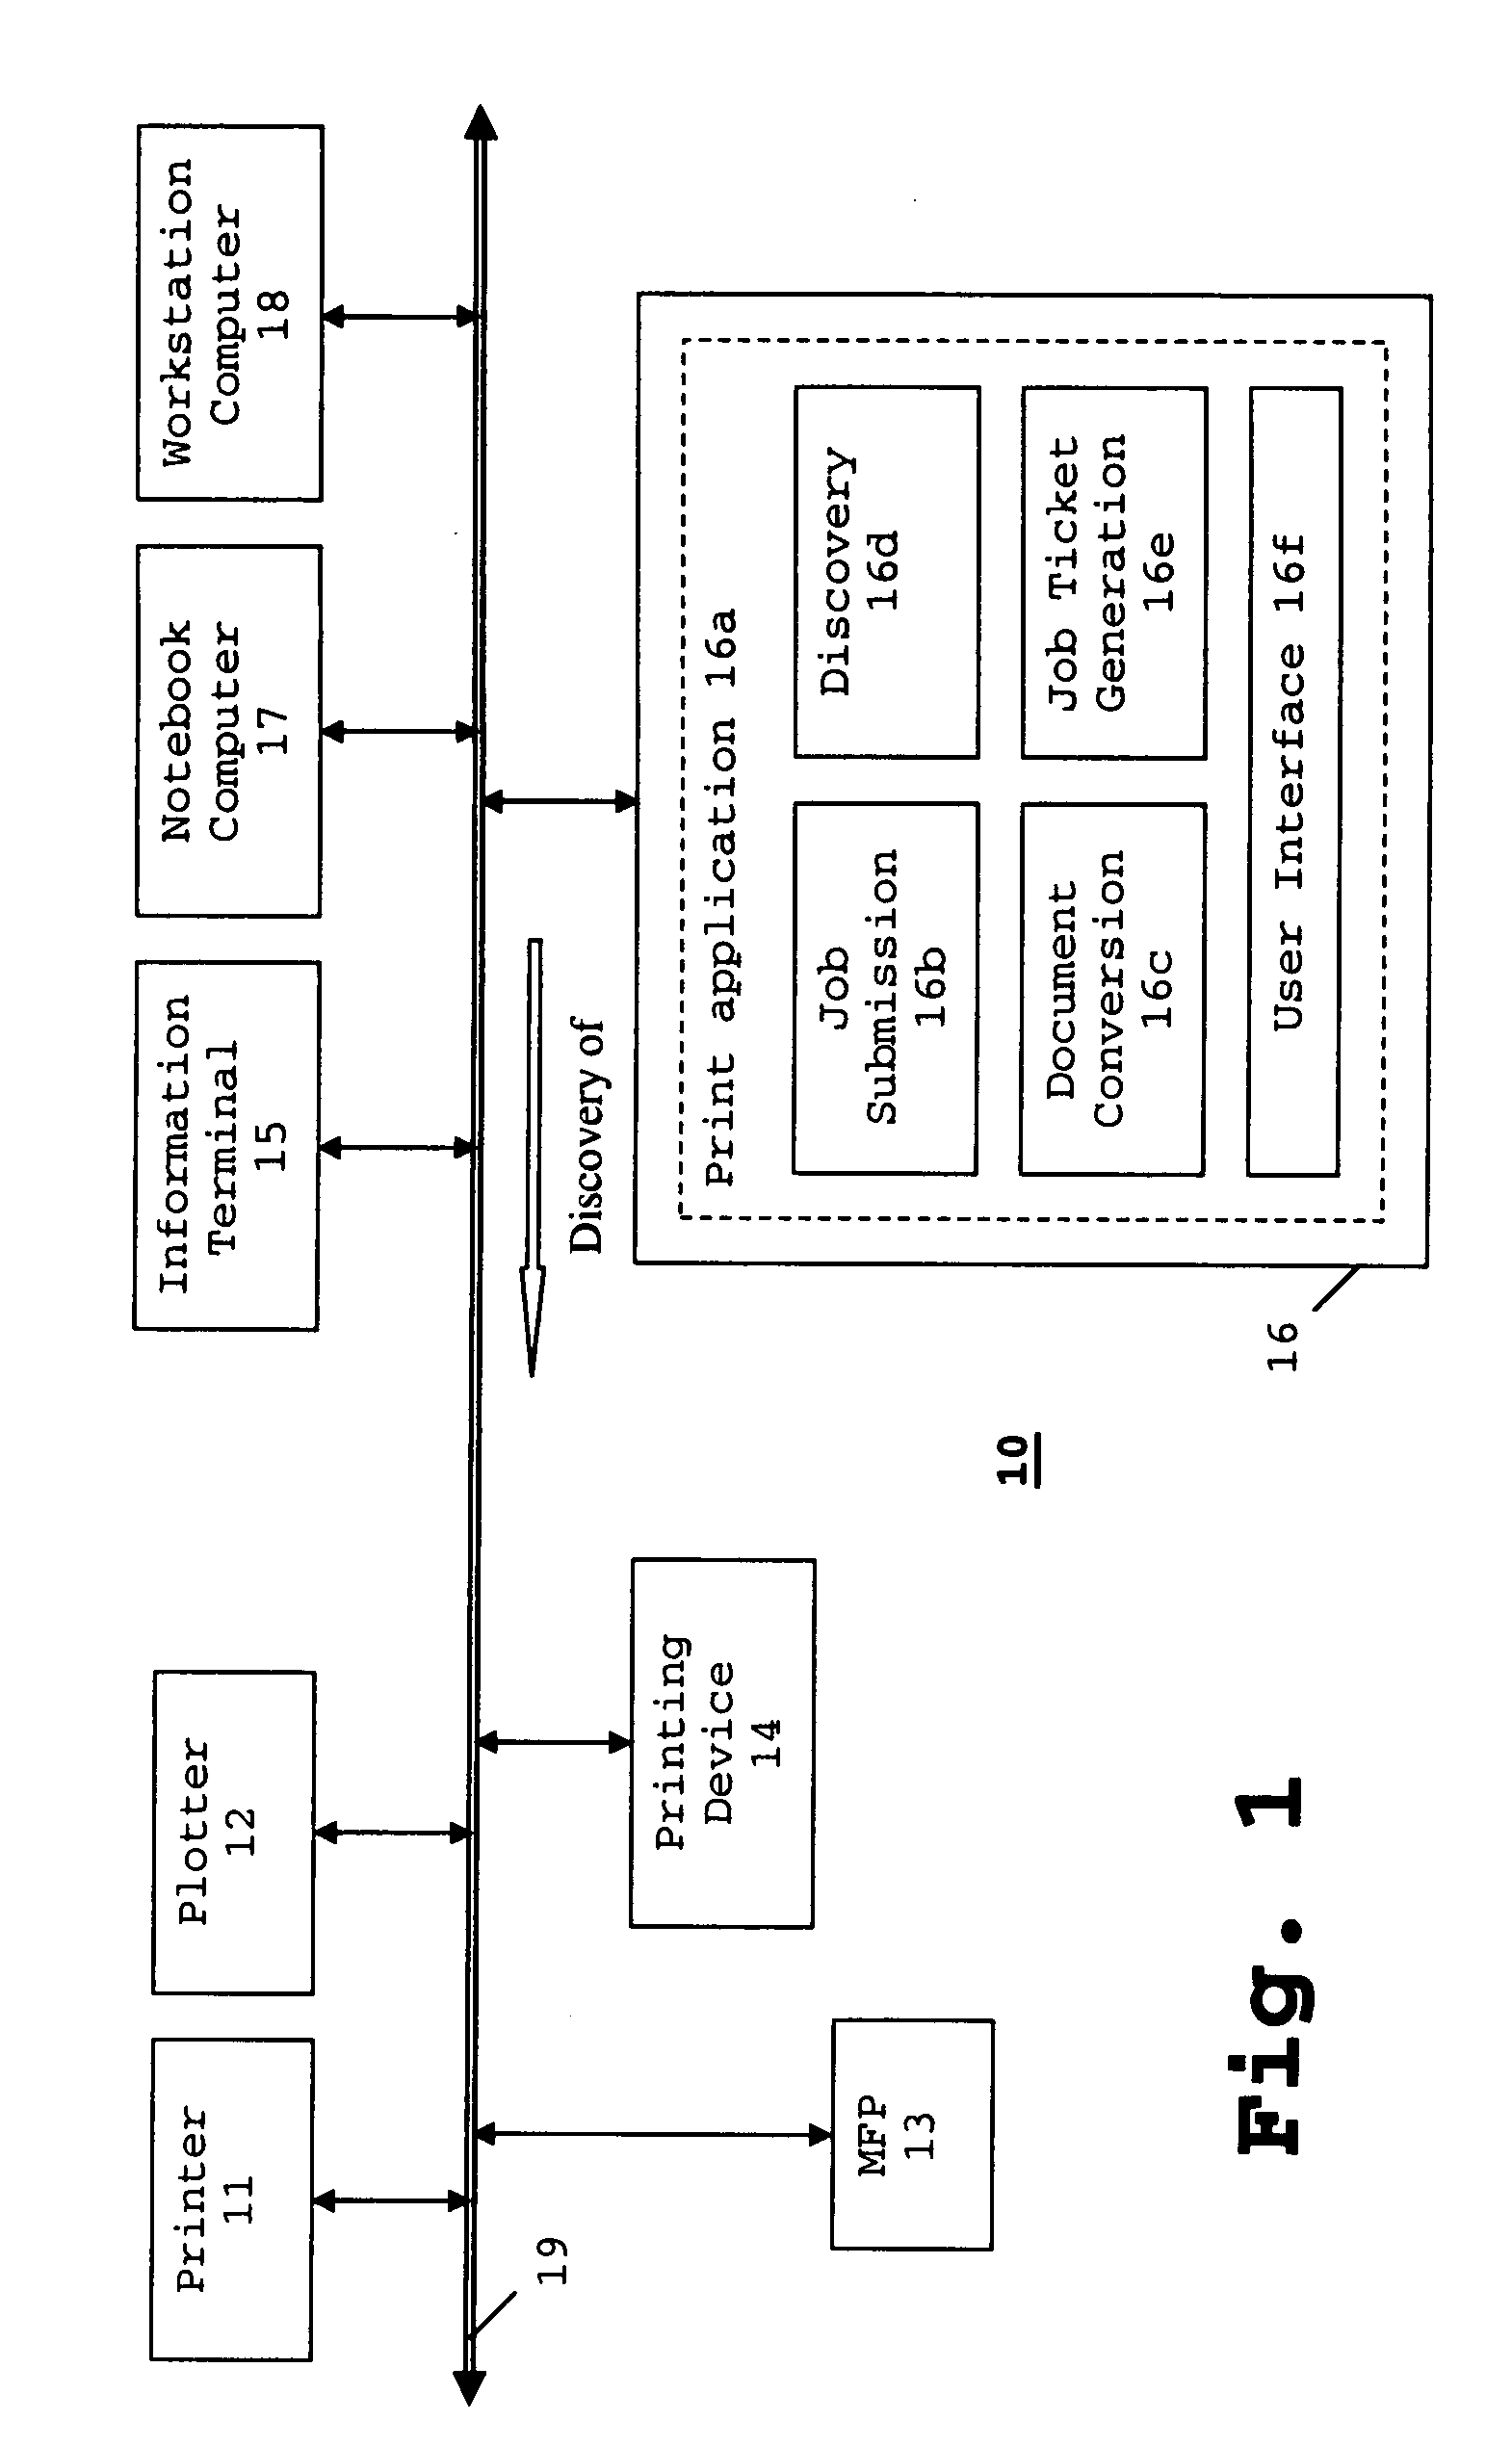 Driverless printing system, apparatus and method